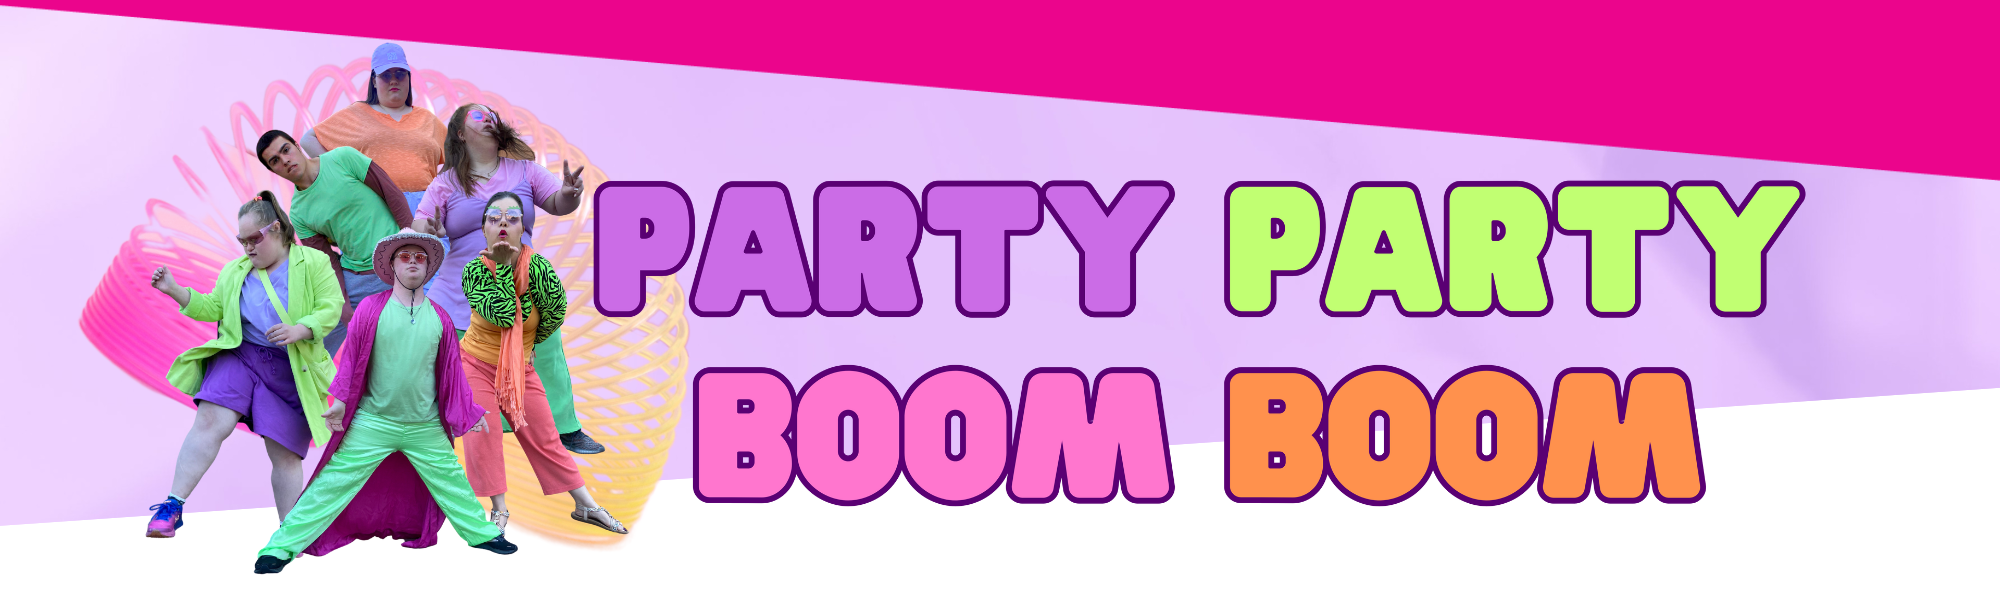 Party Party Boom Boom